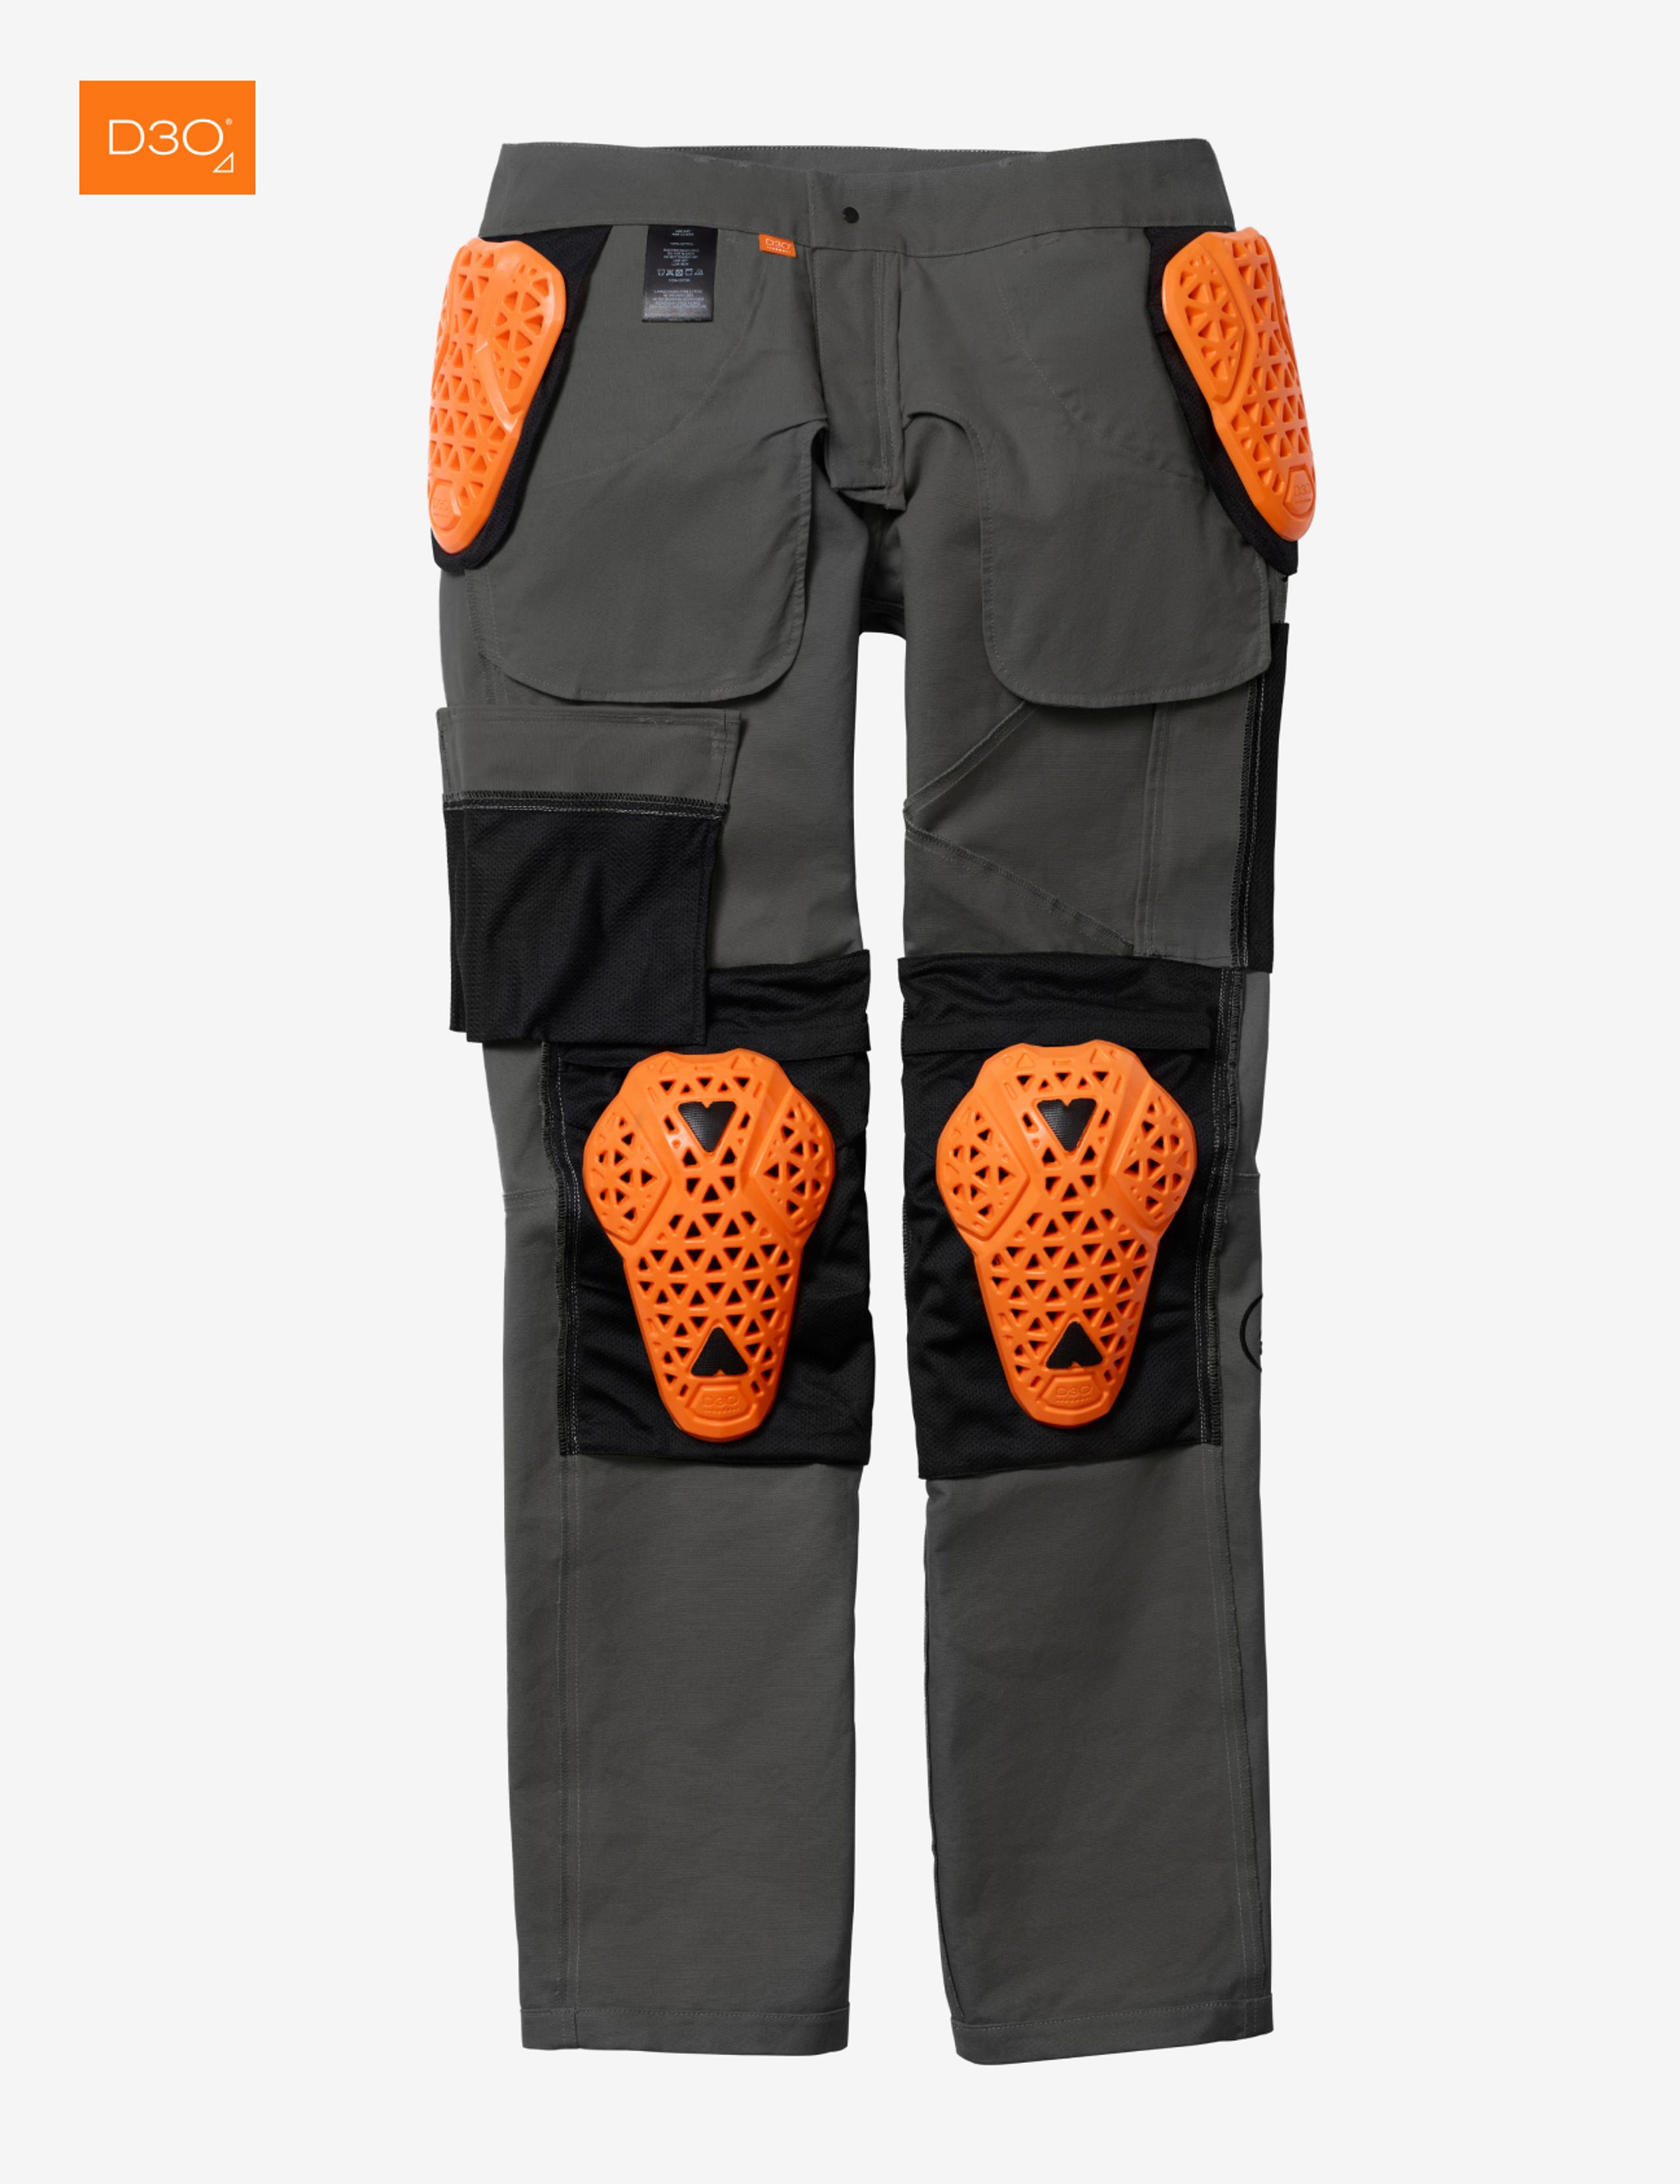 Studio lay-down of Mojave Motorcycle Pant with D3O placement